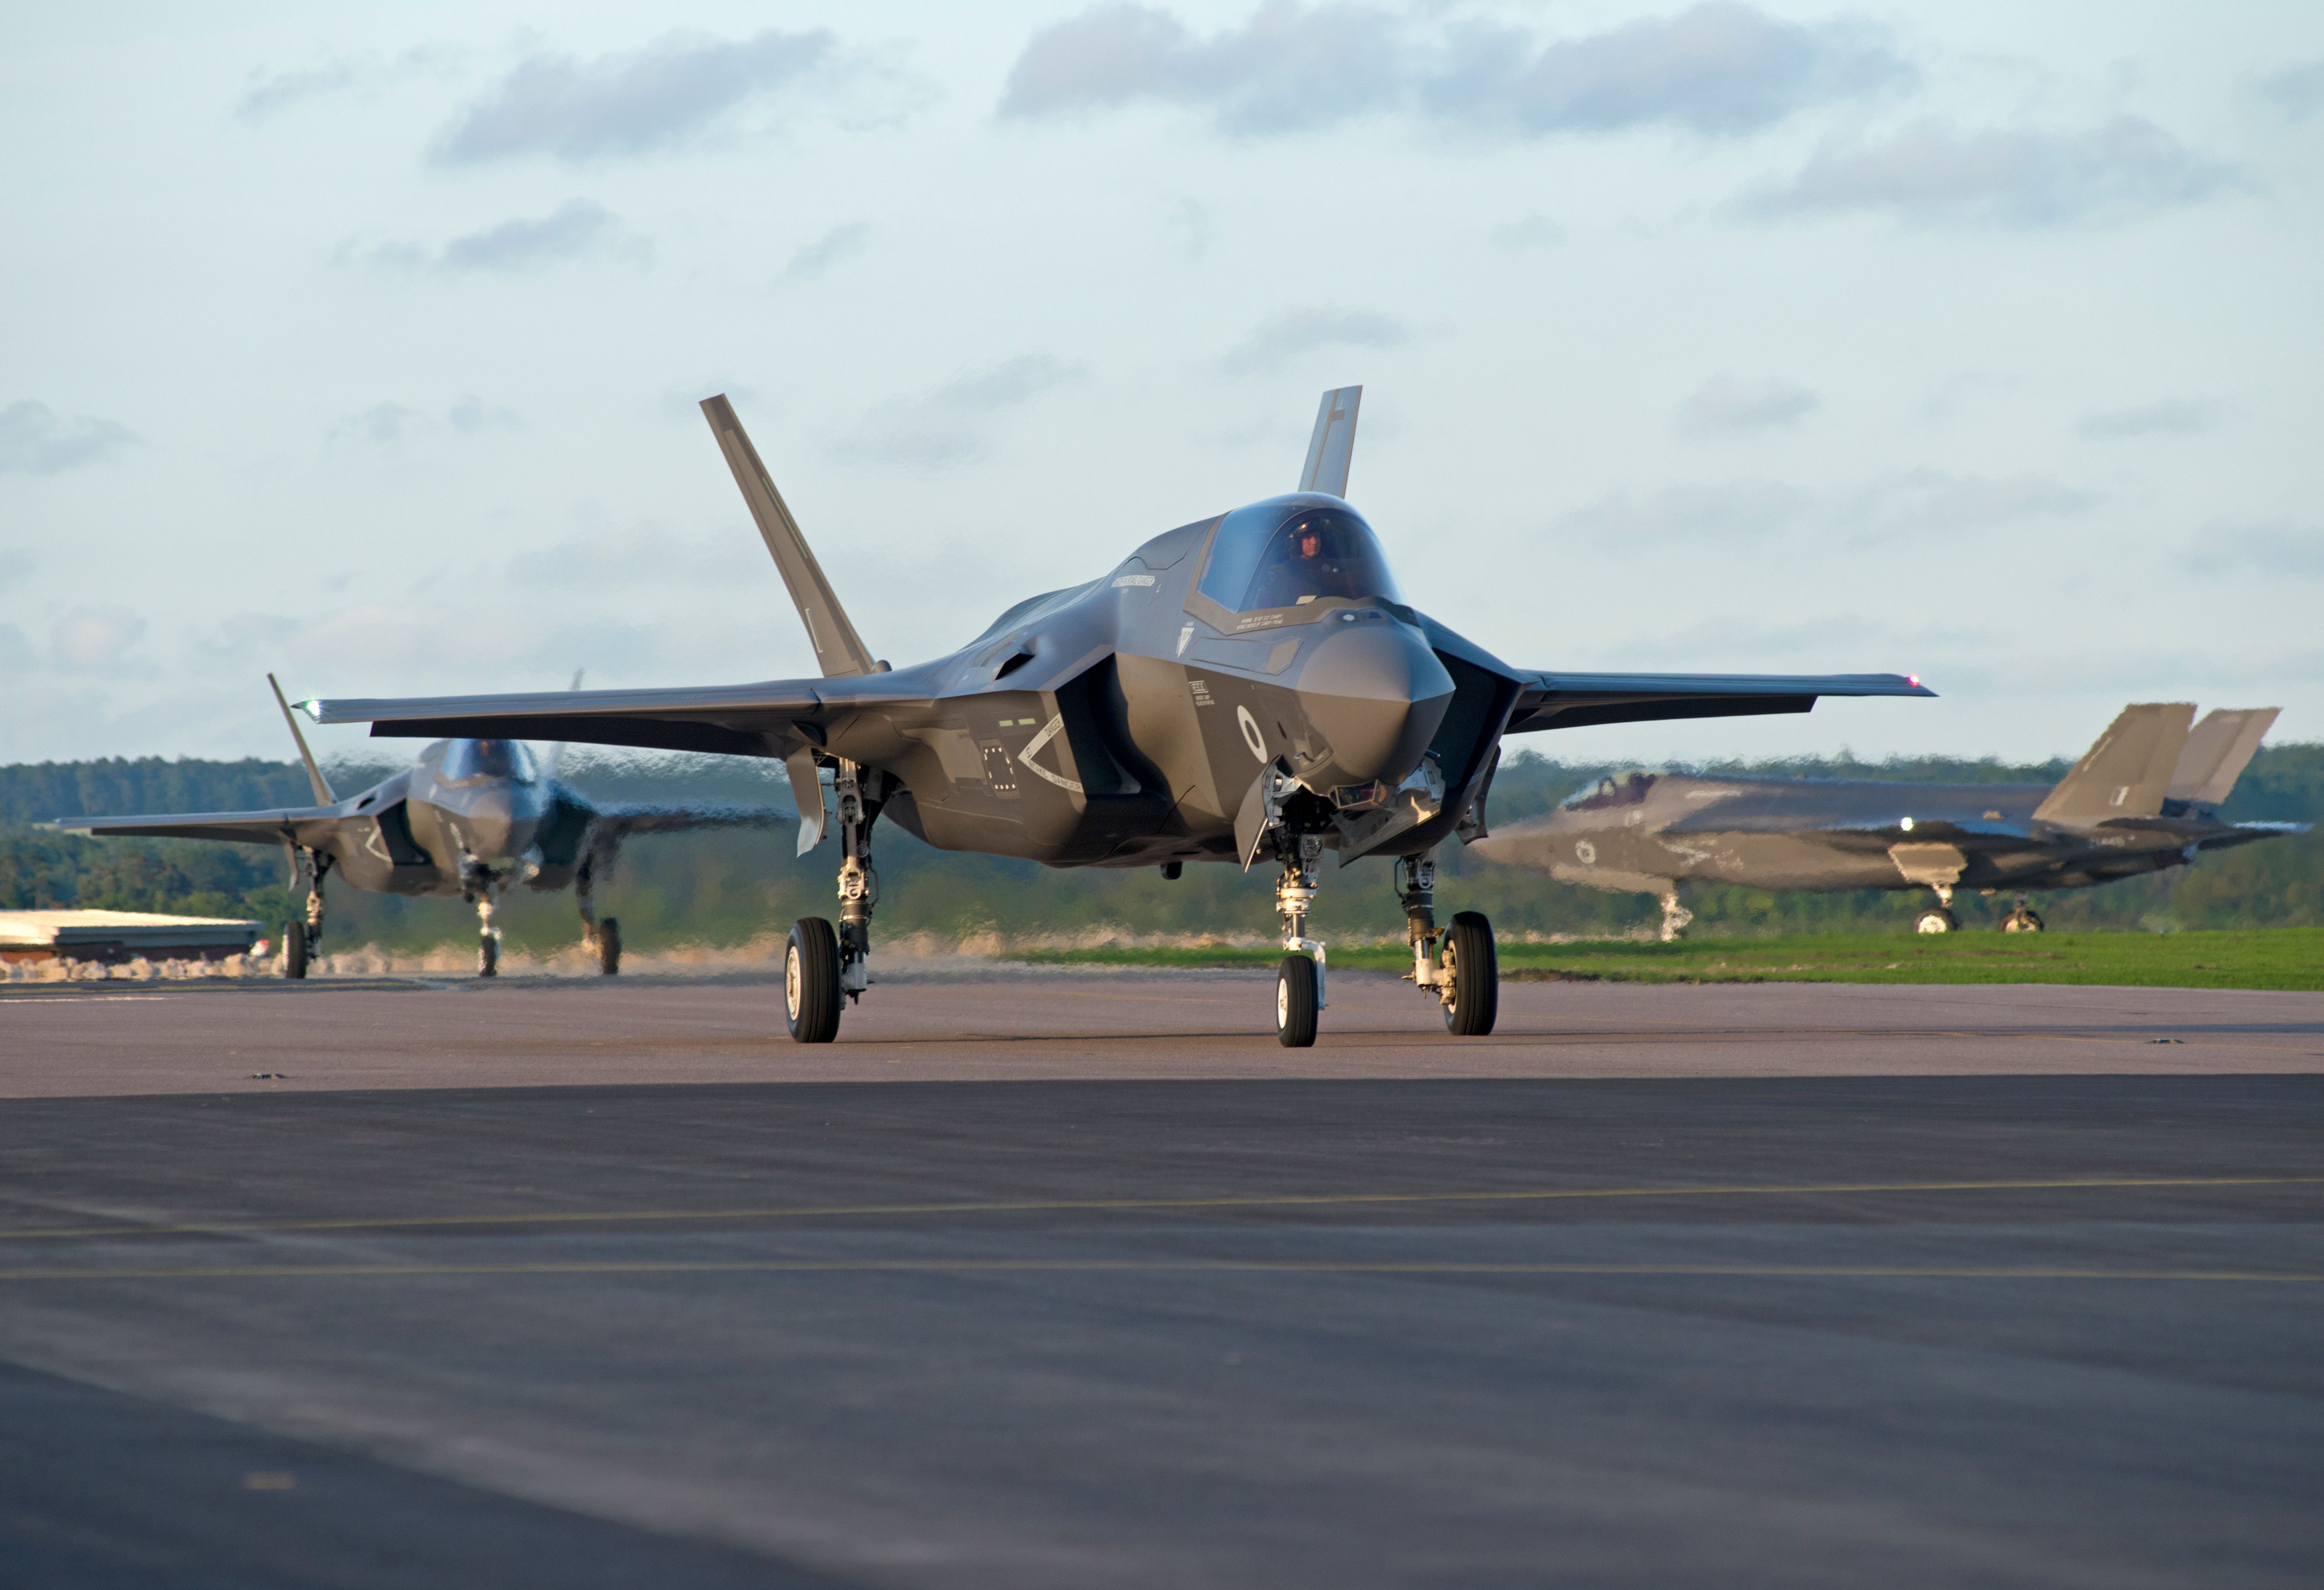 Three F-35Bs on an airfield apron.